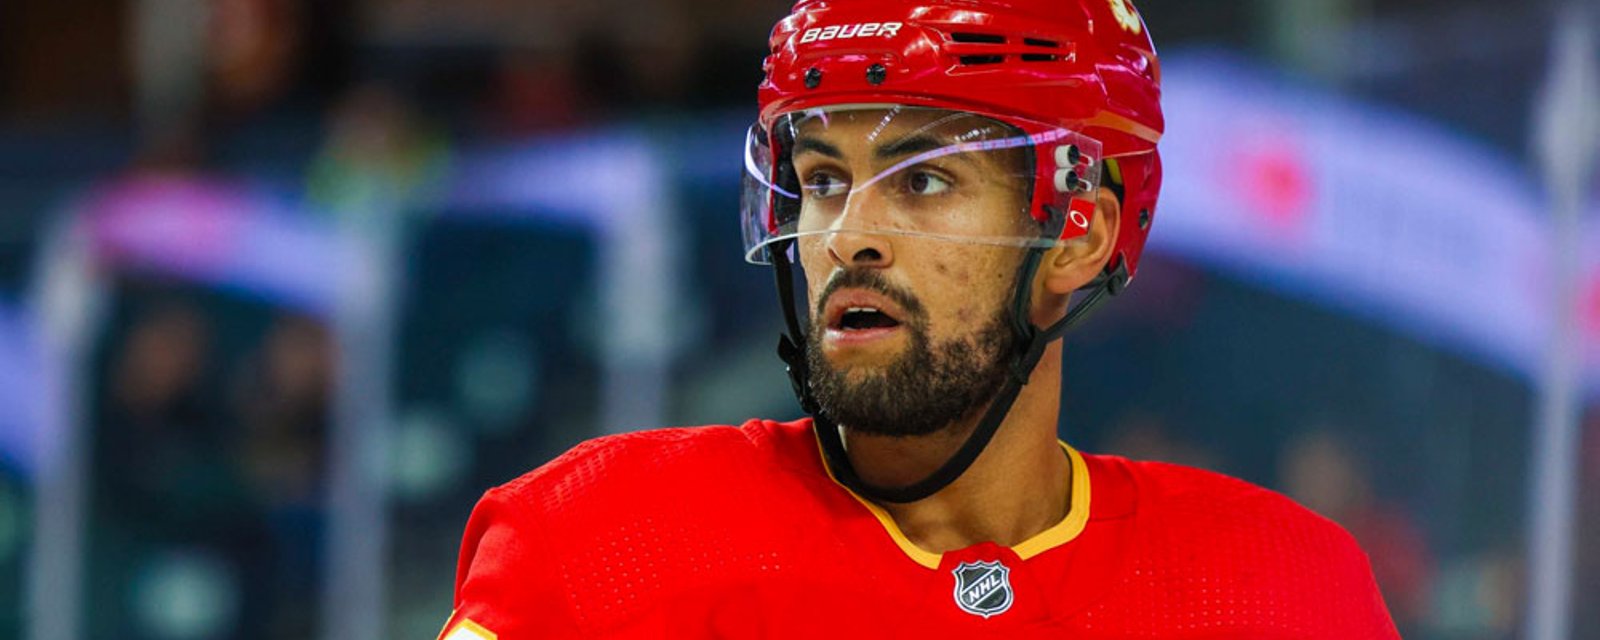 Flames avoid arbitration with Kylington, sign him to two year deal